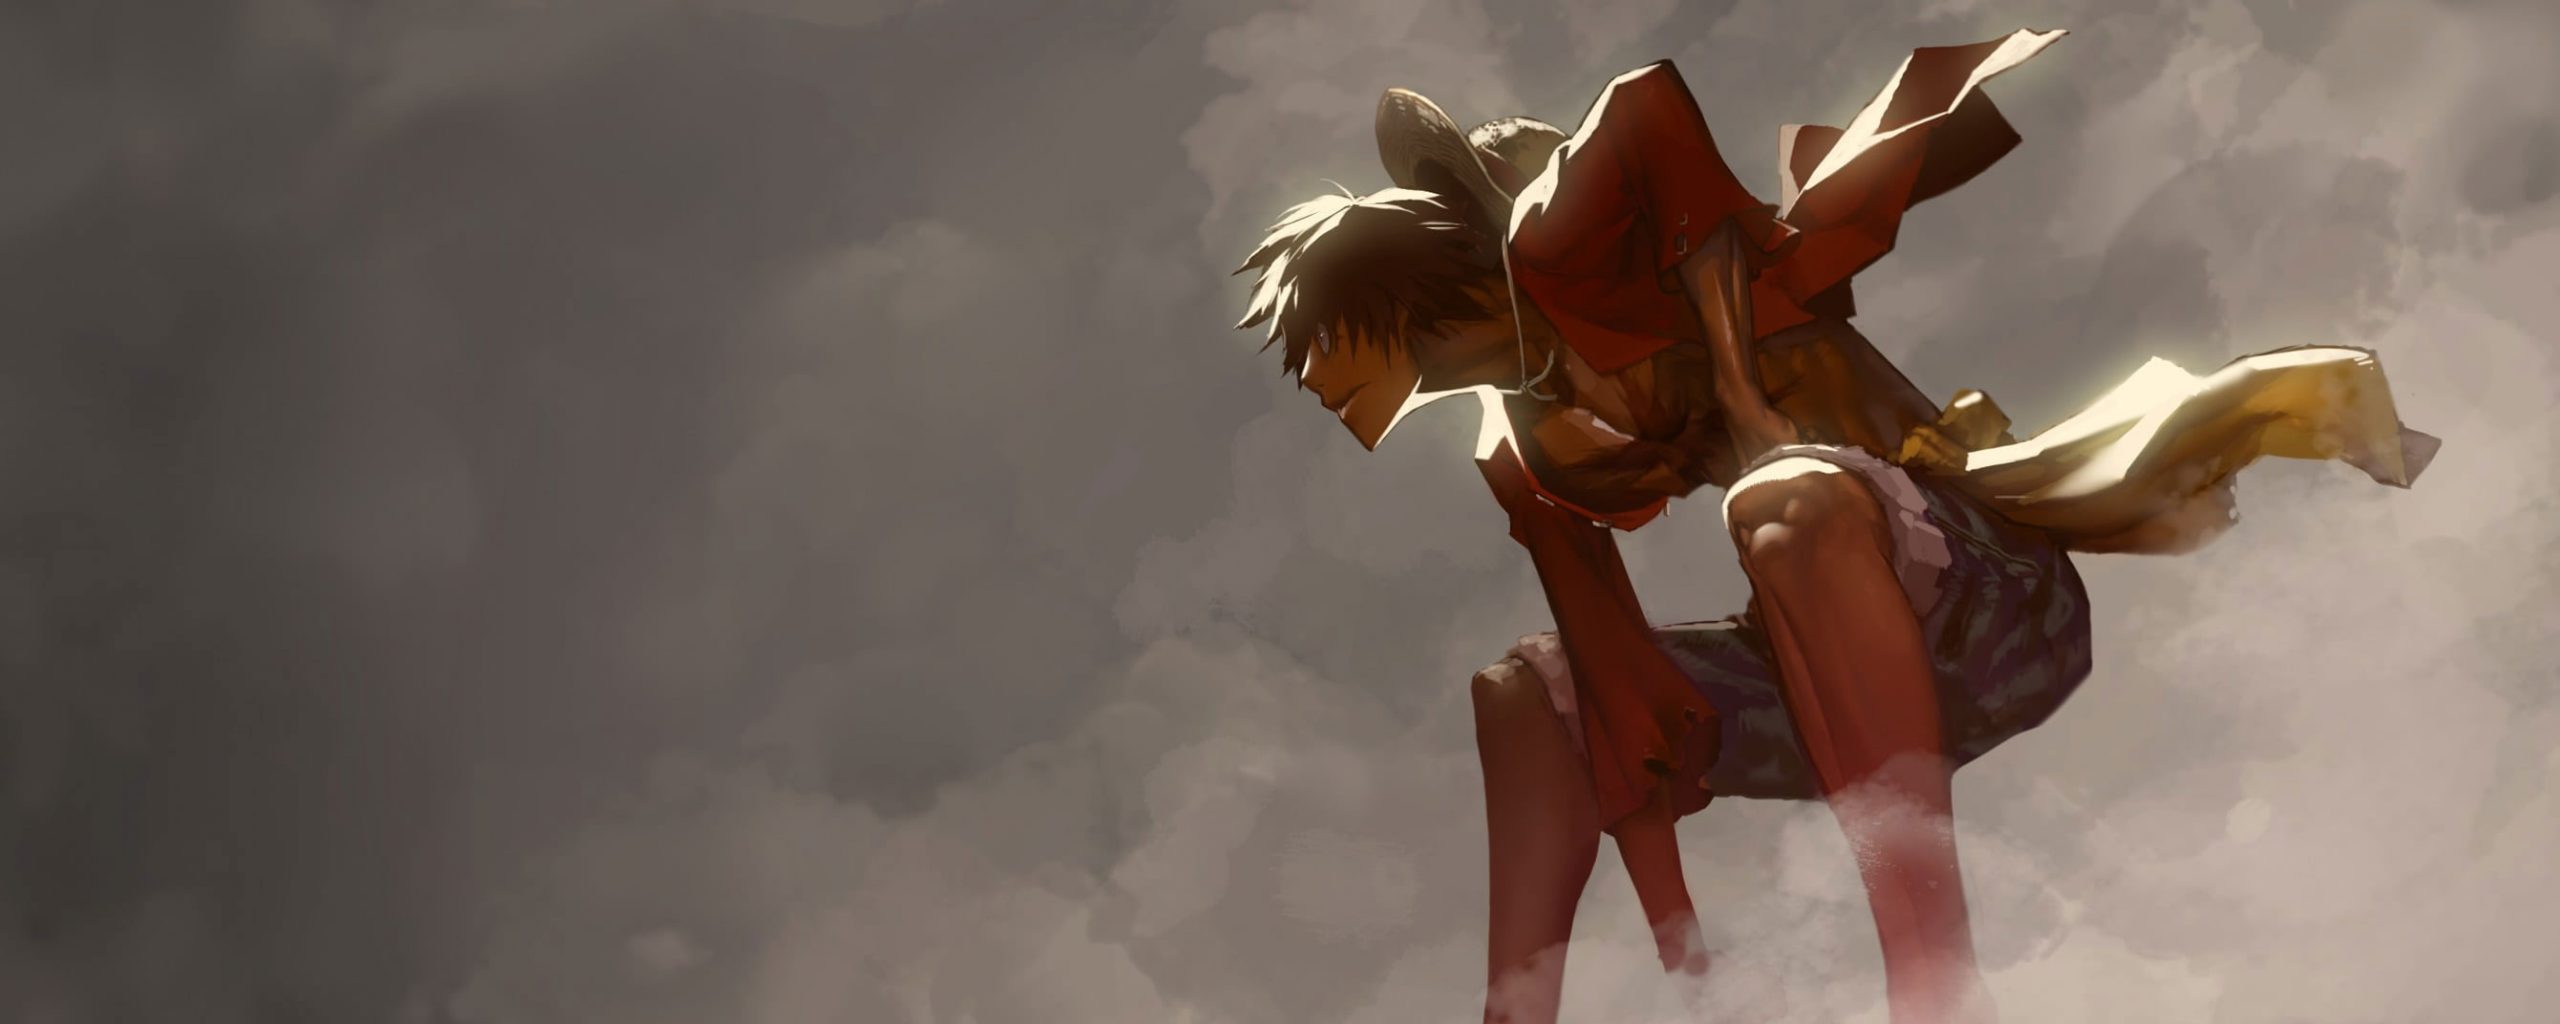 One Piece wallpaper, Monkey D. Luffy, anime boys, cloud – sky, low angle view